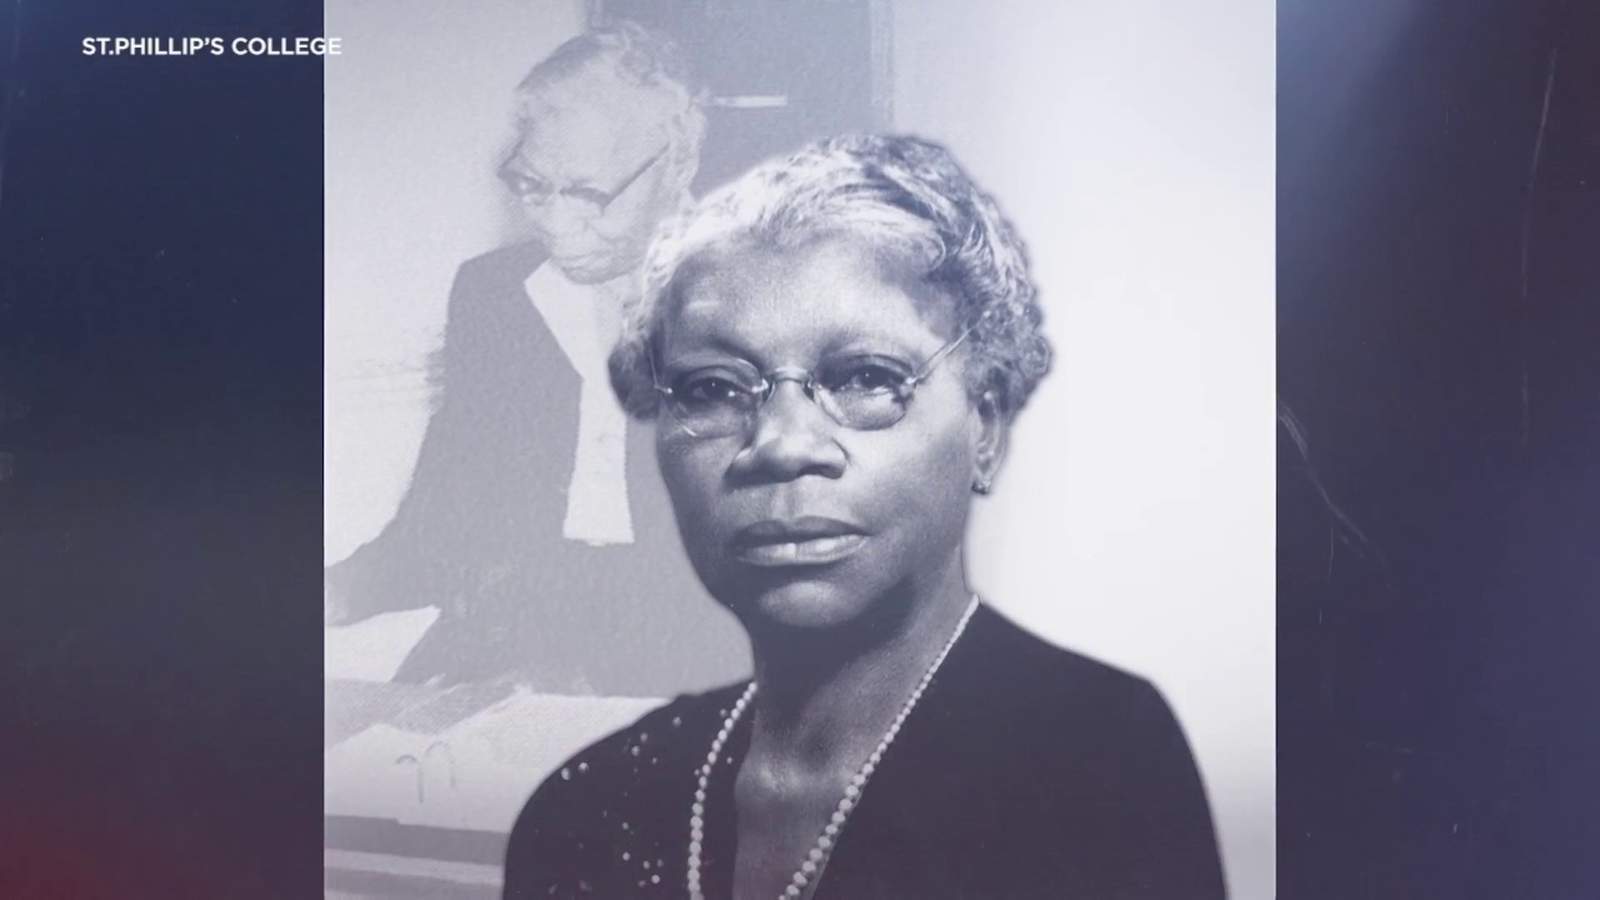 Black History Month: President of St. Phillip’s College follows legacy of female founder